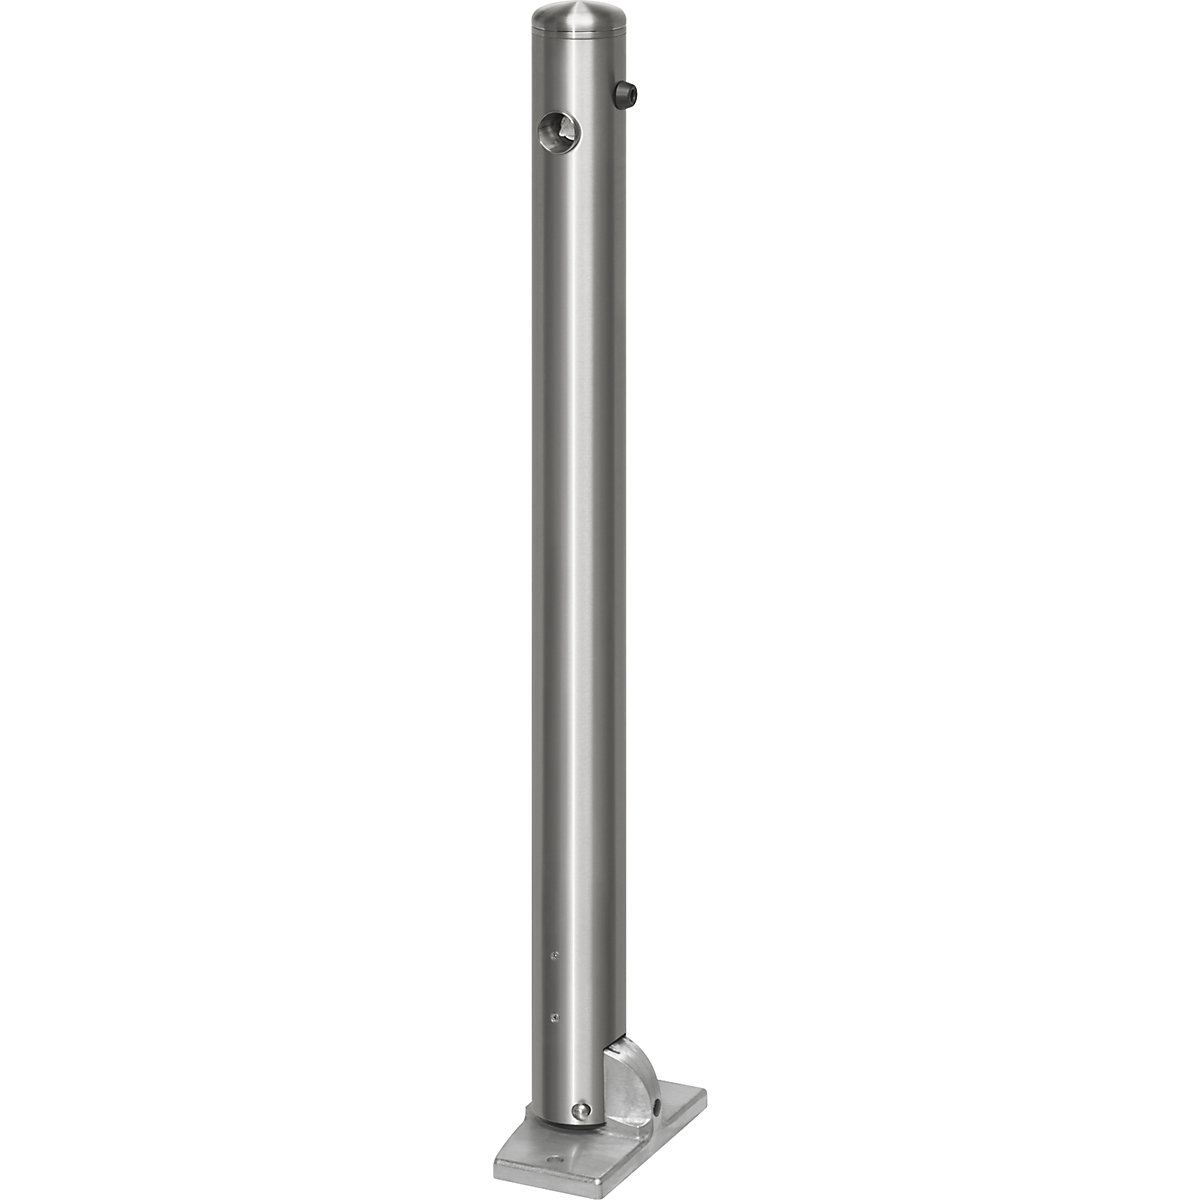 Stainless steel barrier post, with end cap, base plate to bolt in place, Ø 76 mm, triangular lock